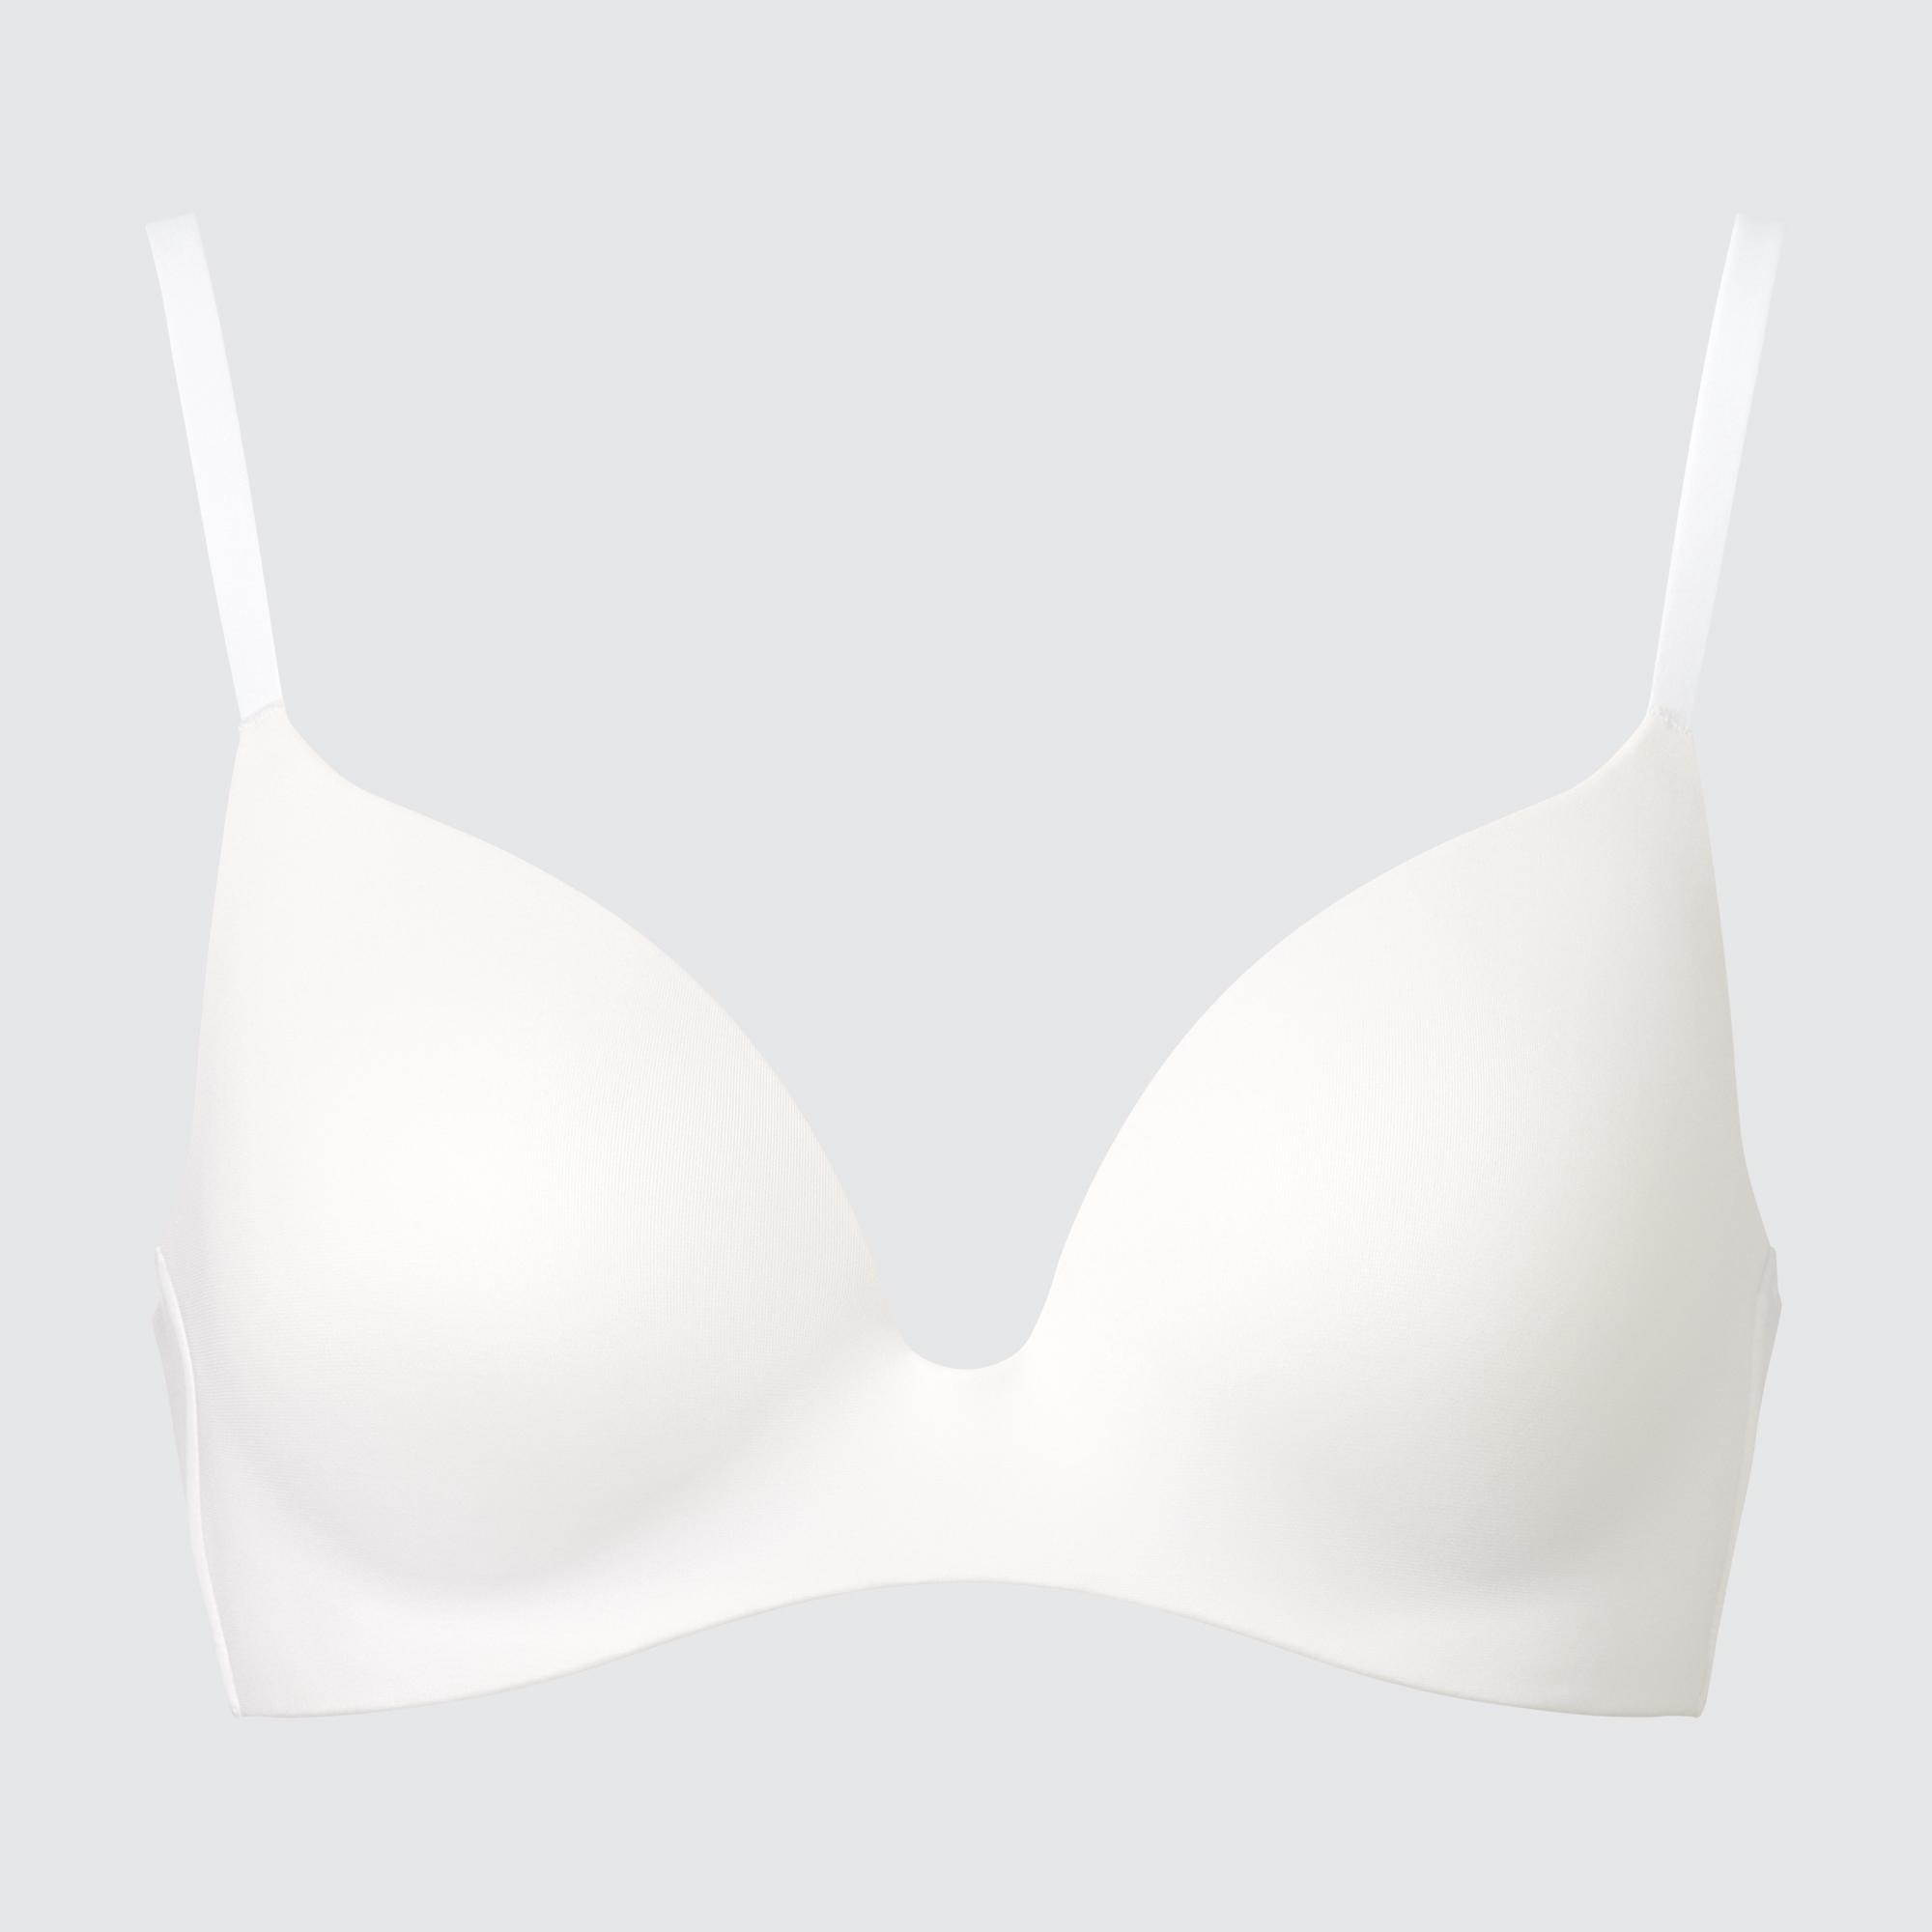 Shop looks for「Wireless Bra (3D Hold)」